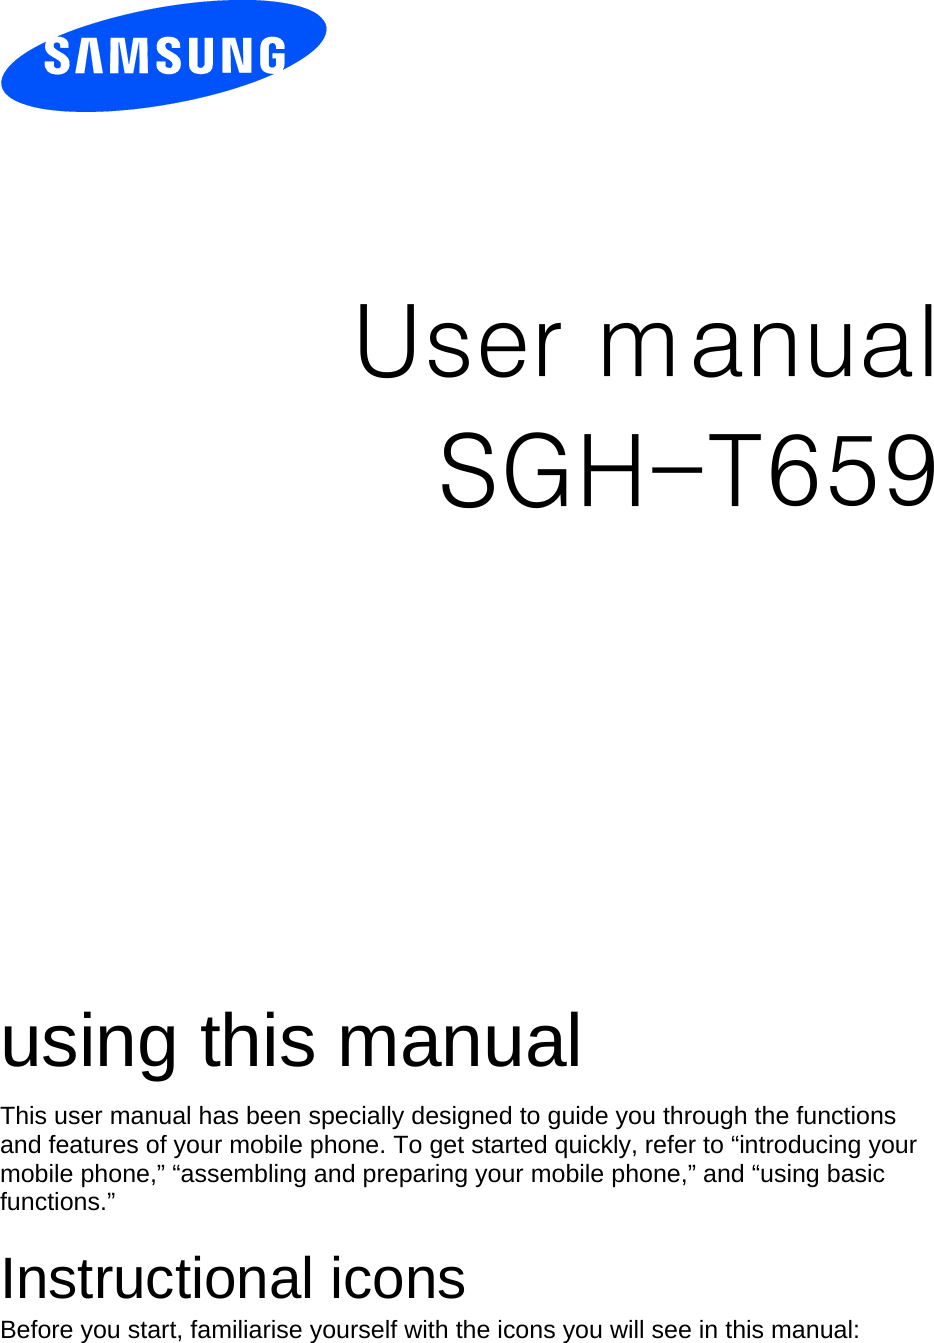          User manual SGH-T659                  using this manual This user manual has been specially designed to guide you through the functions and features of your mobile phone. To get started quickly, refer to “introducing your mobile phone,” “assembling and preparing your mobile phone,” and “using basic functions.”  Instructional icons Before you start, familiarise yourself with the icons you will see in this manual:   